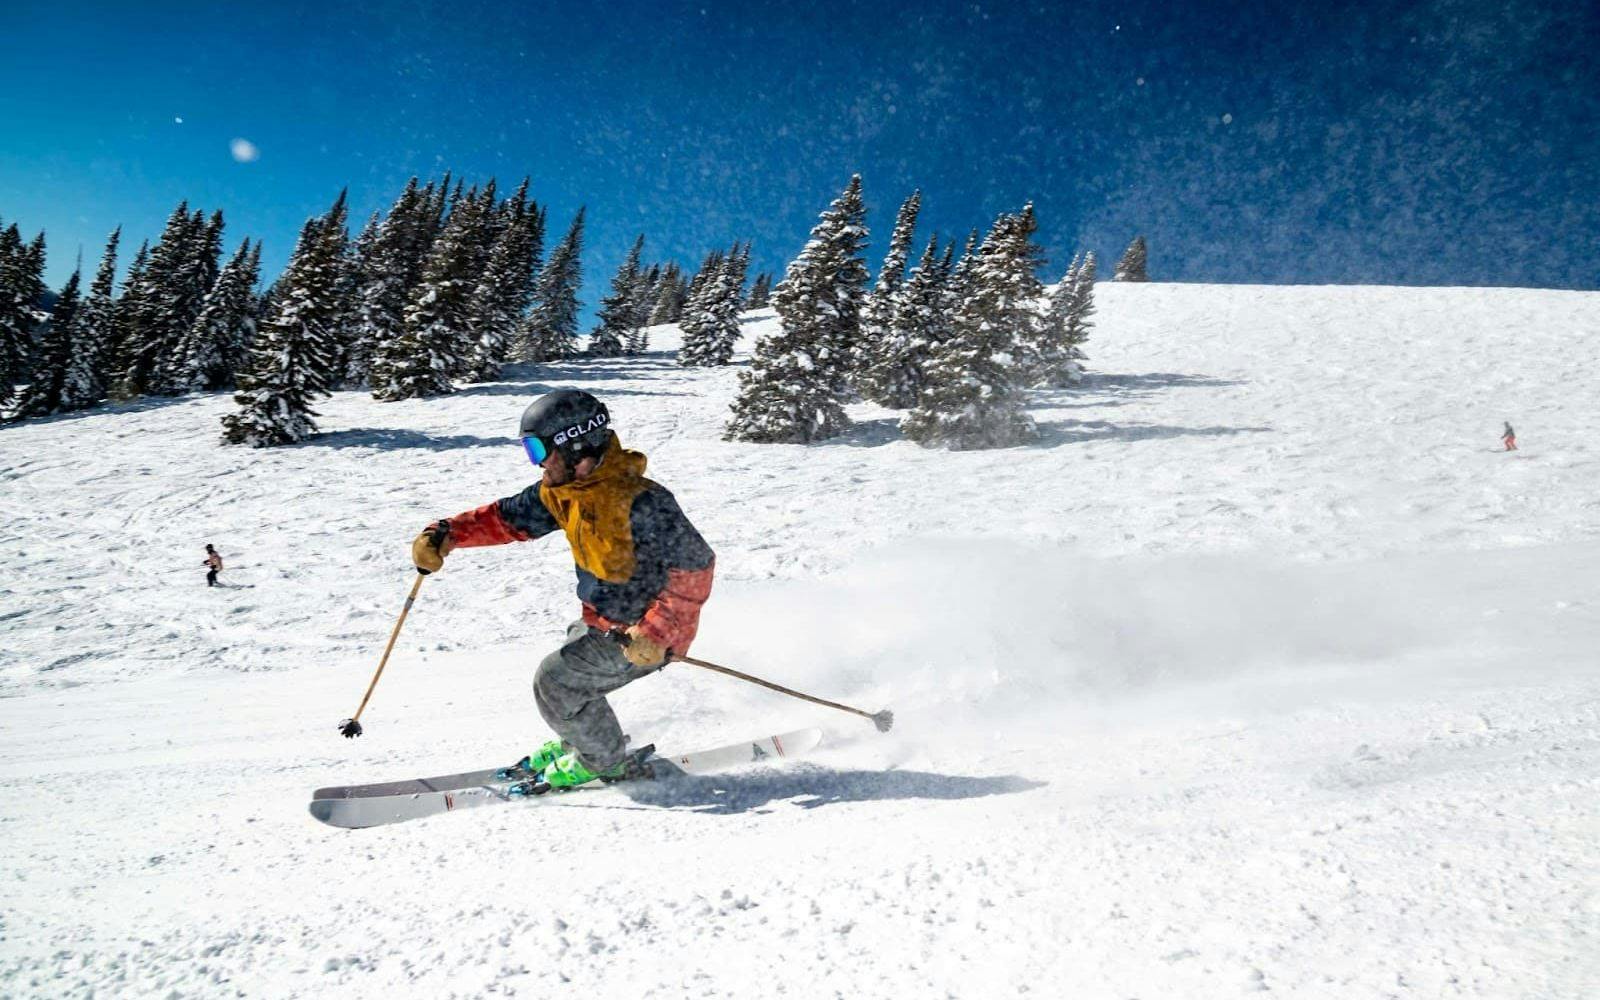 10 Best Ski Destinations for Experts to Shred Some Serious Powder